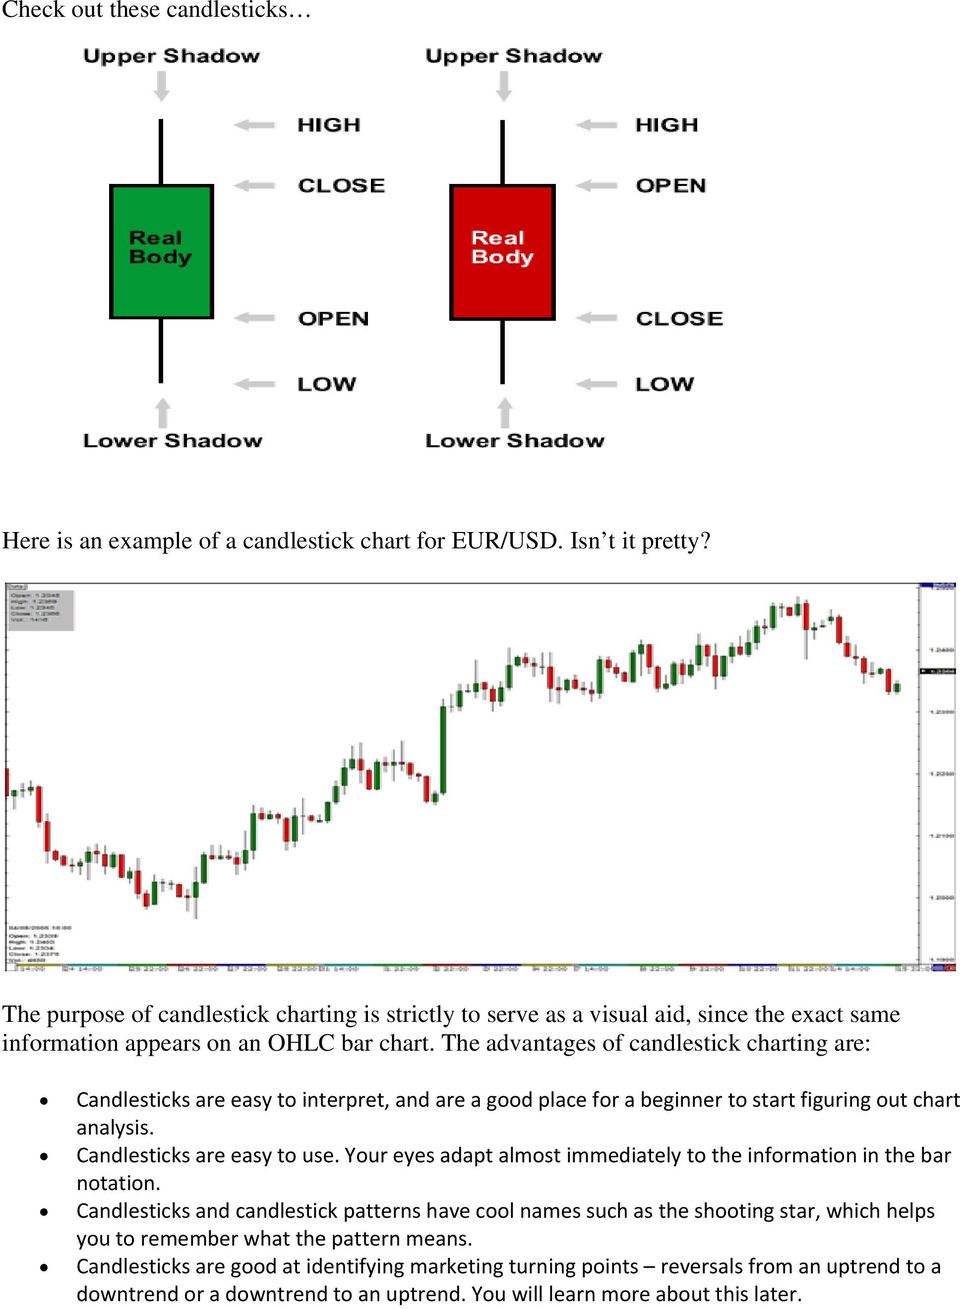 The advantages of candlestick charting are: Candlesticks are easy to interpret, and are a good place for a beginner to start figuring out chart analysis. Candlesticks are easy to use.